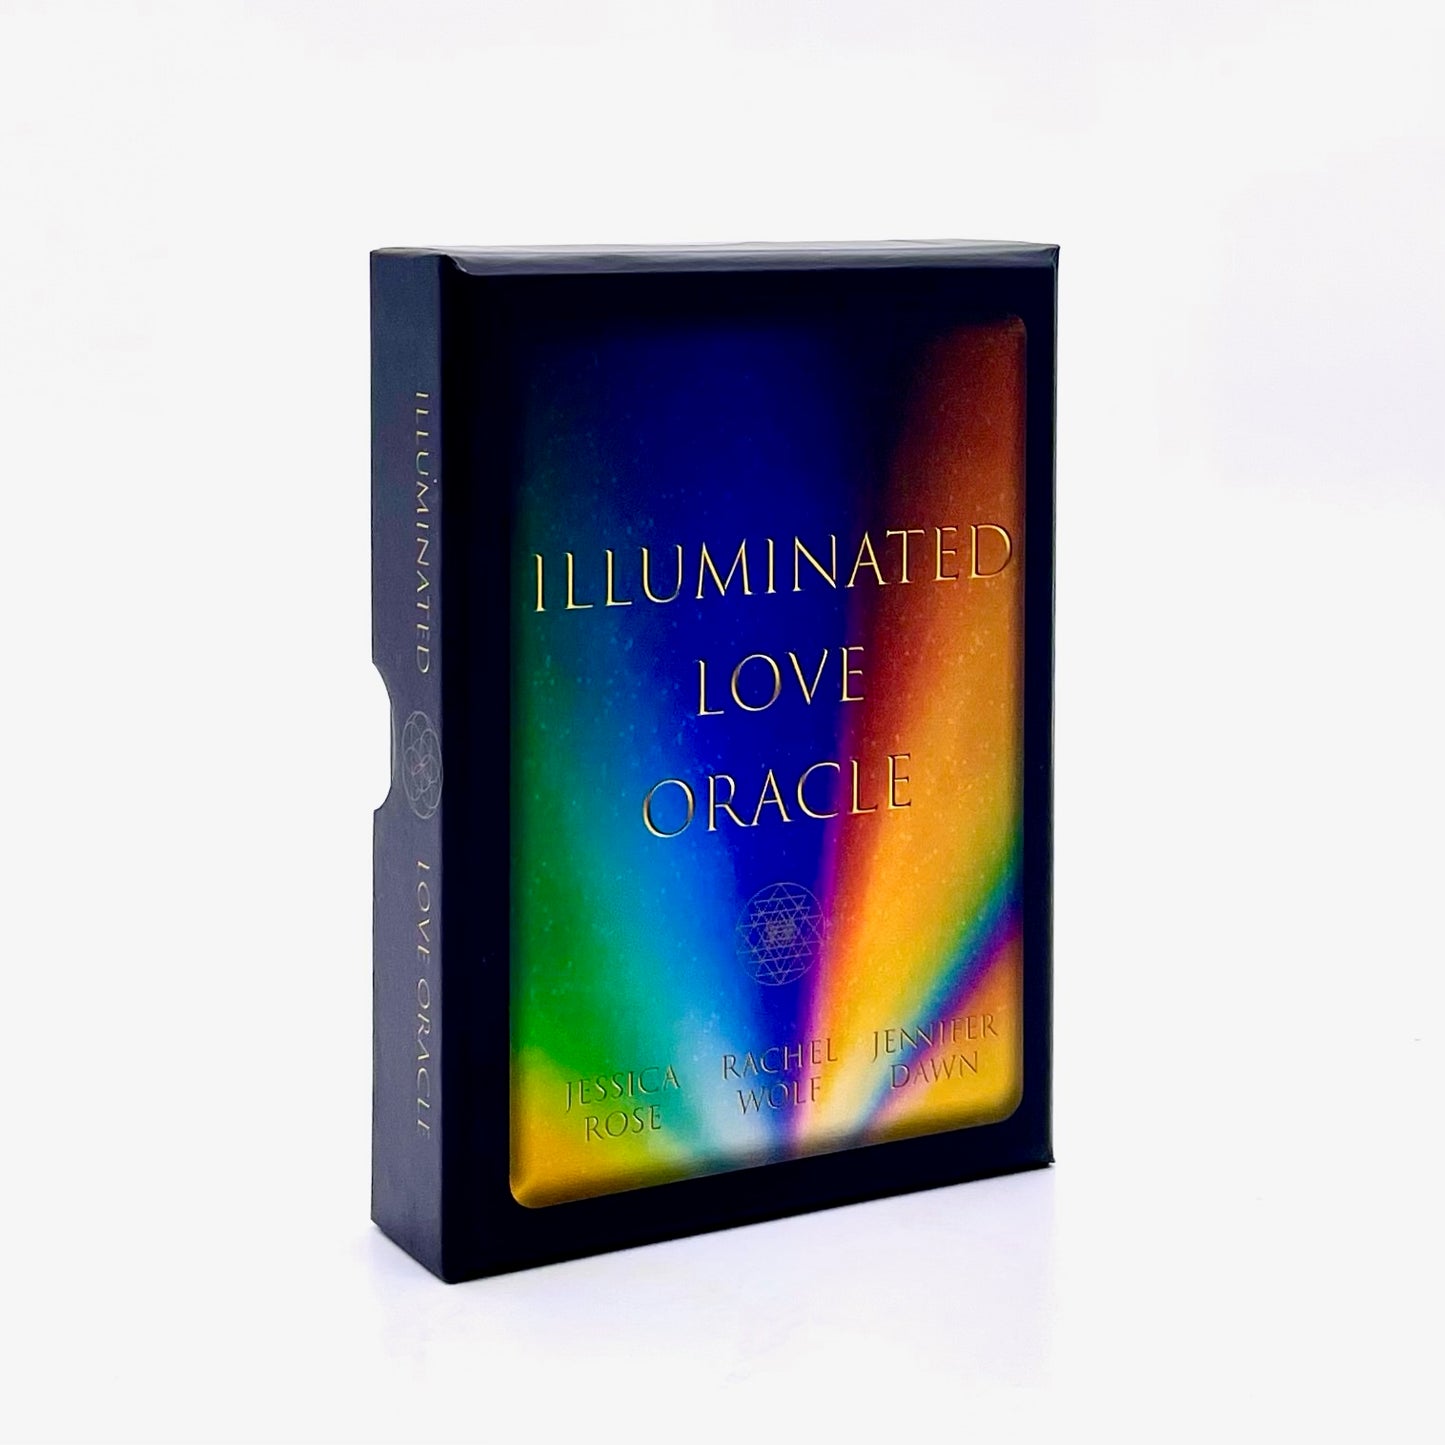 Box cover art of the Illuminated Love Oracle deck .